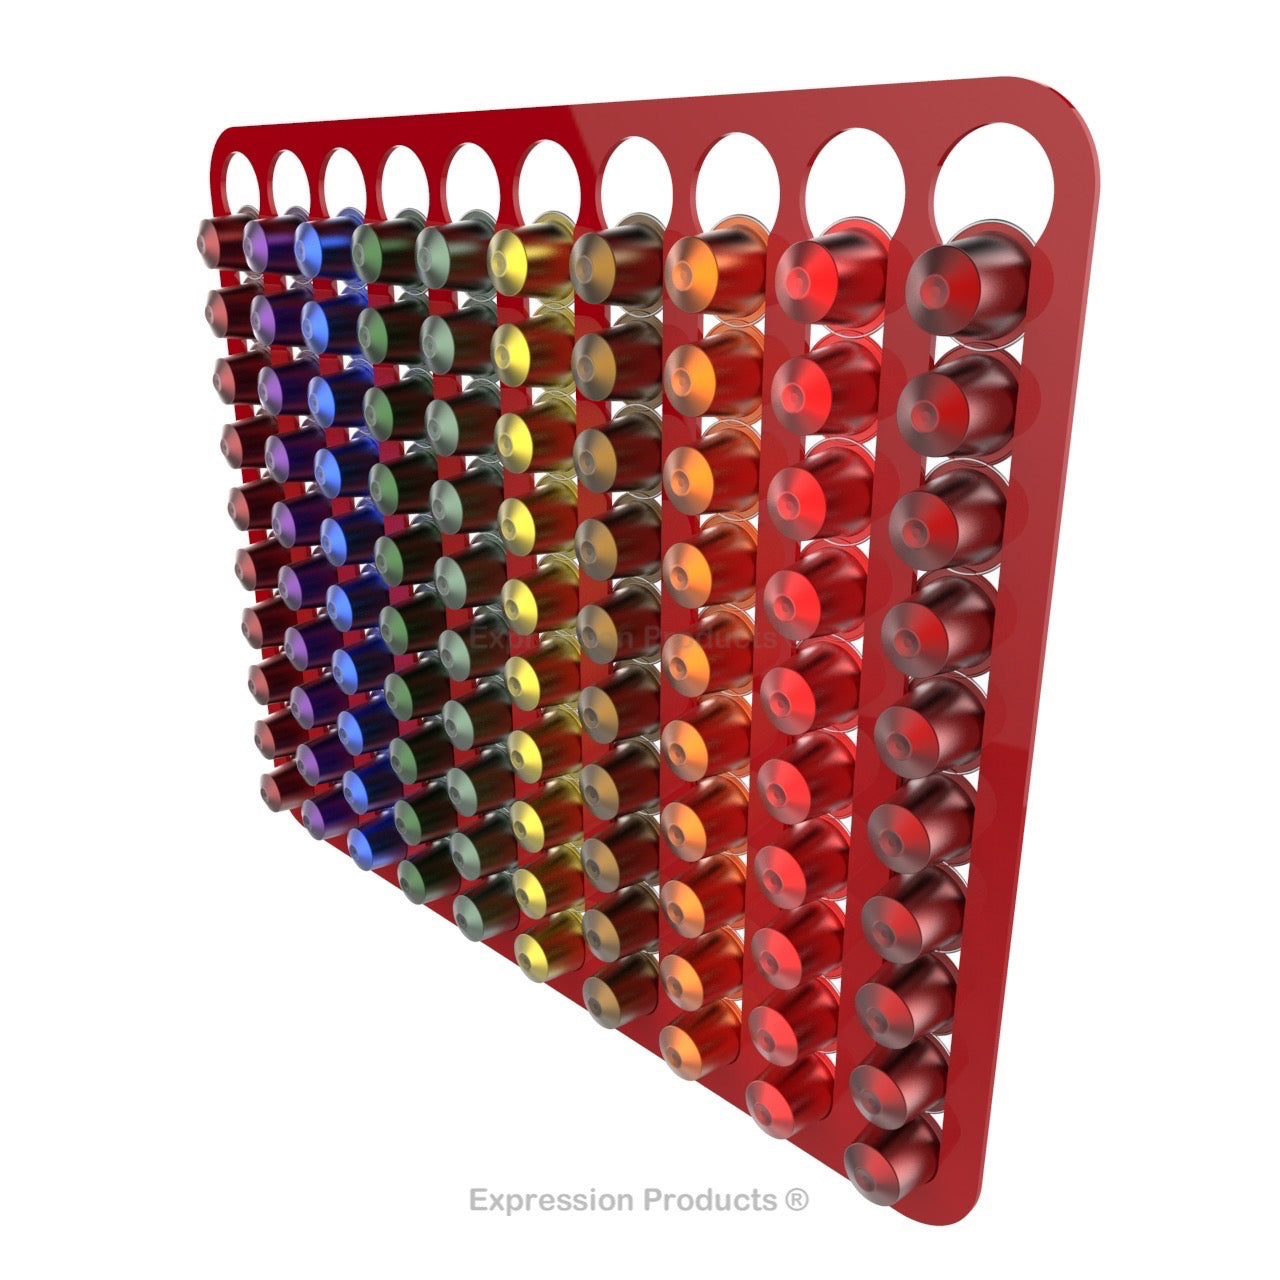 Magnetic Nespresso Original Line coffee pod holder shown in red holding 100 pods